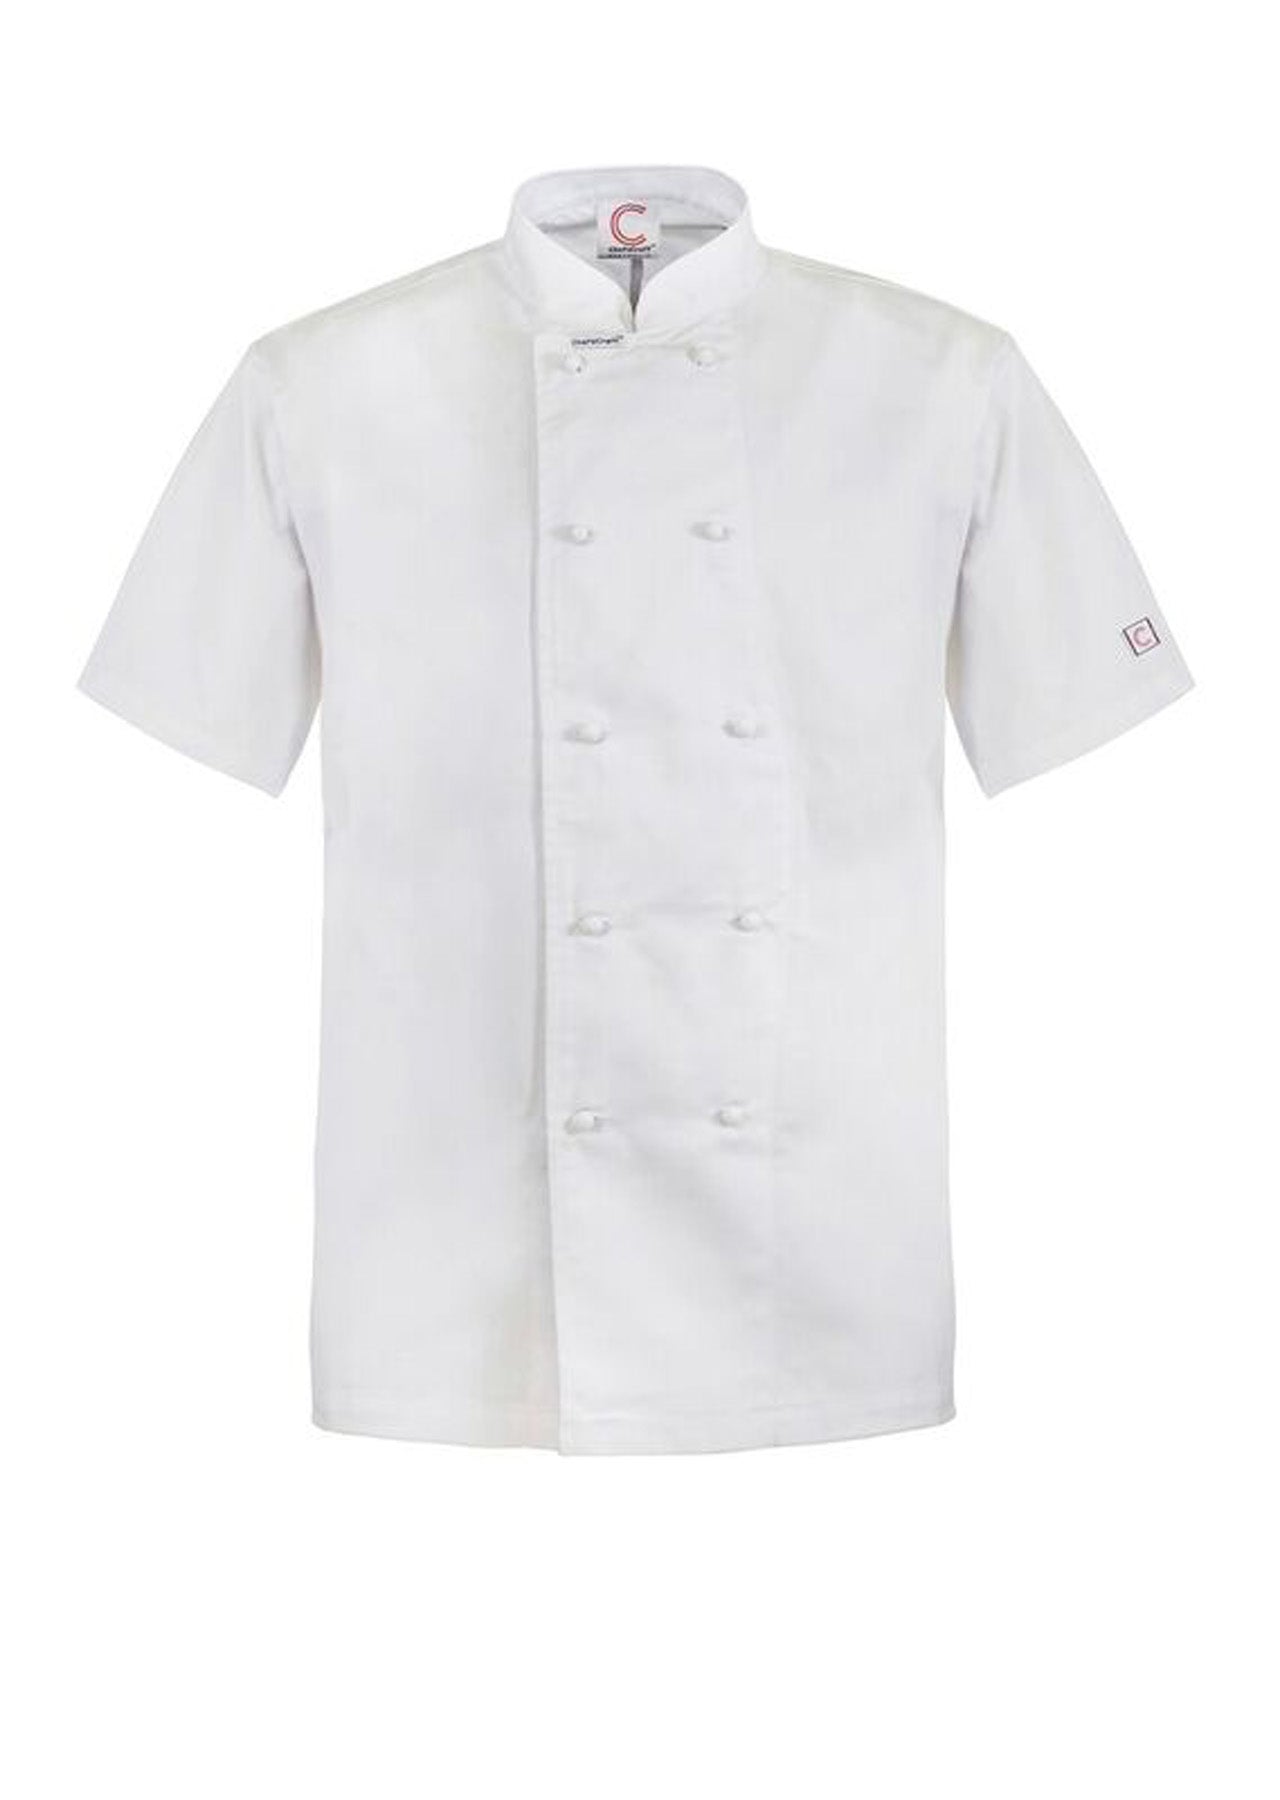 Classic Short Sleeve Chefs Jacket - made by ChefsCraft